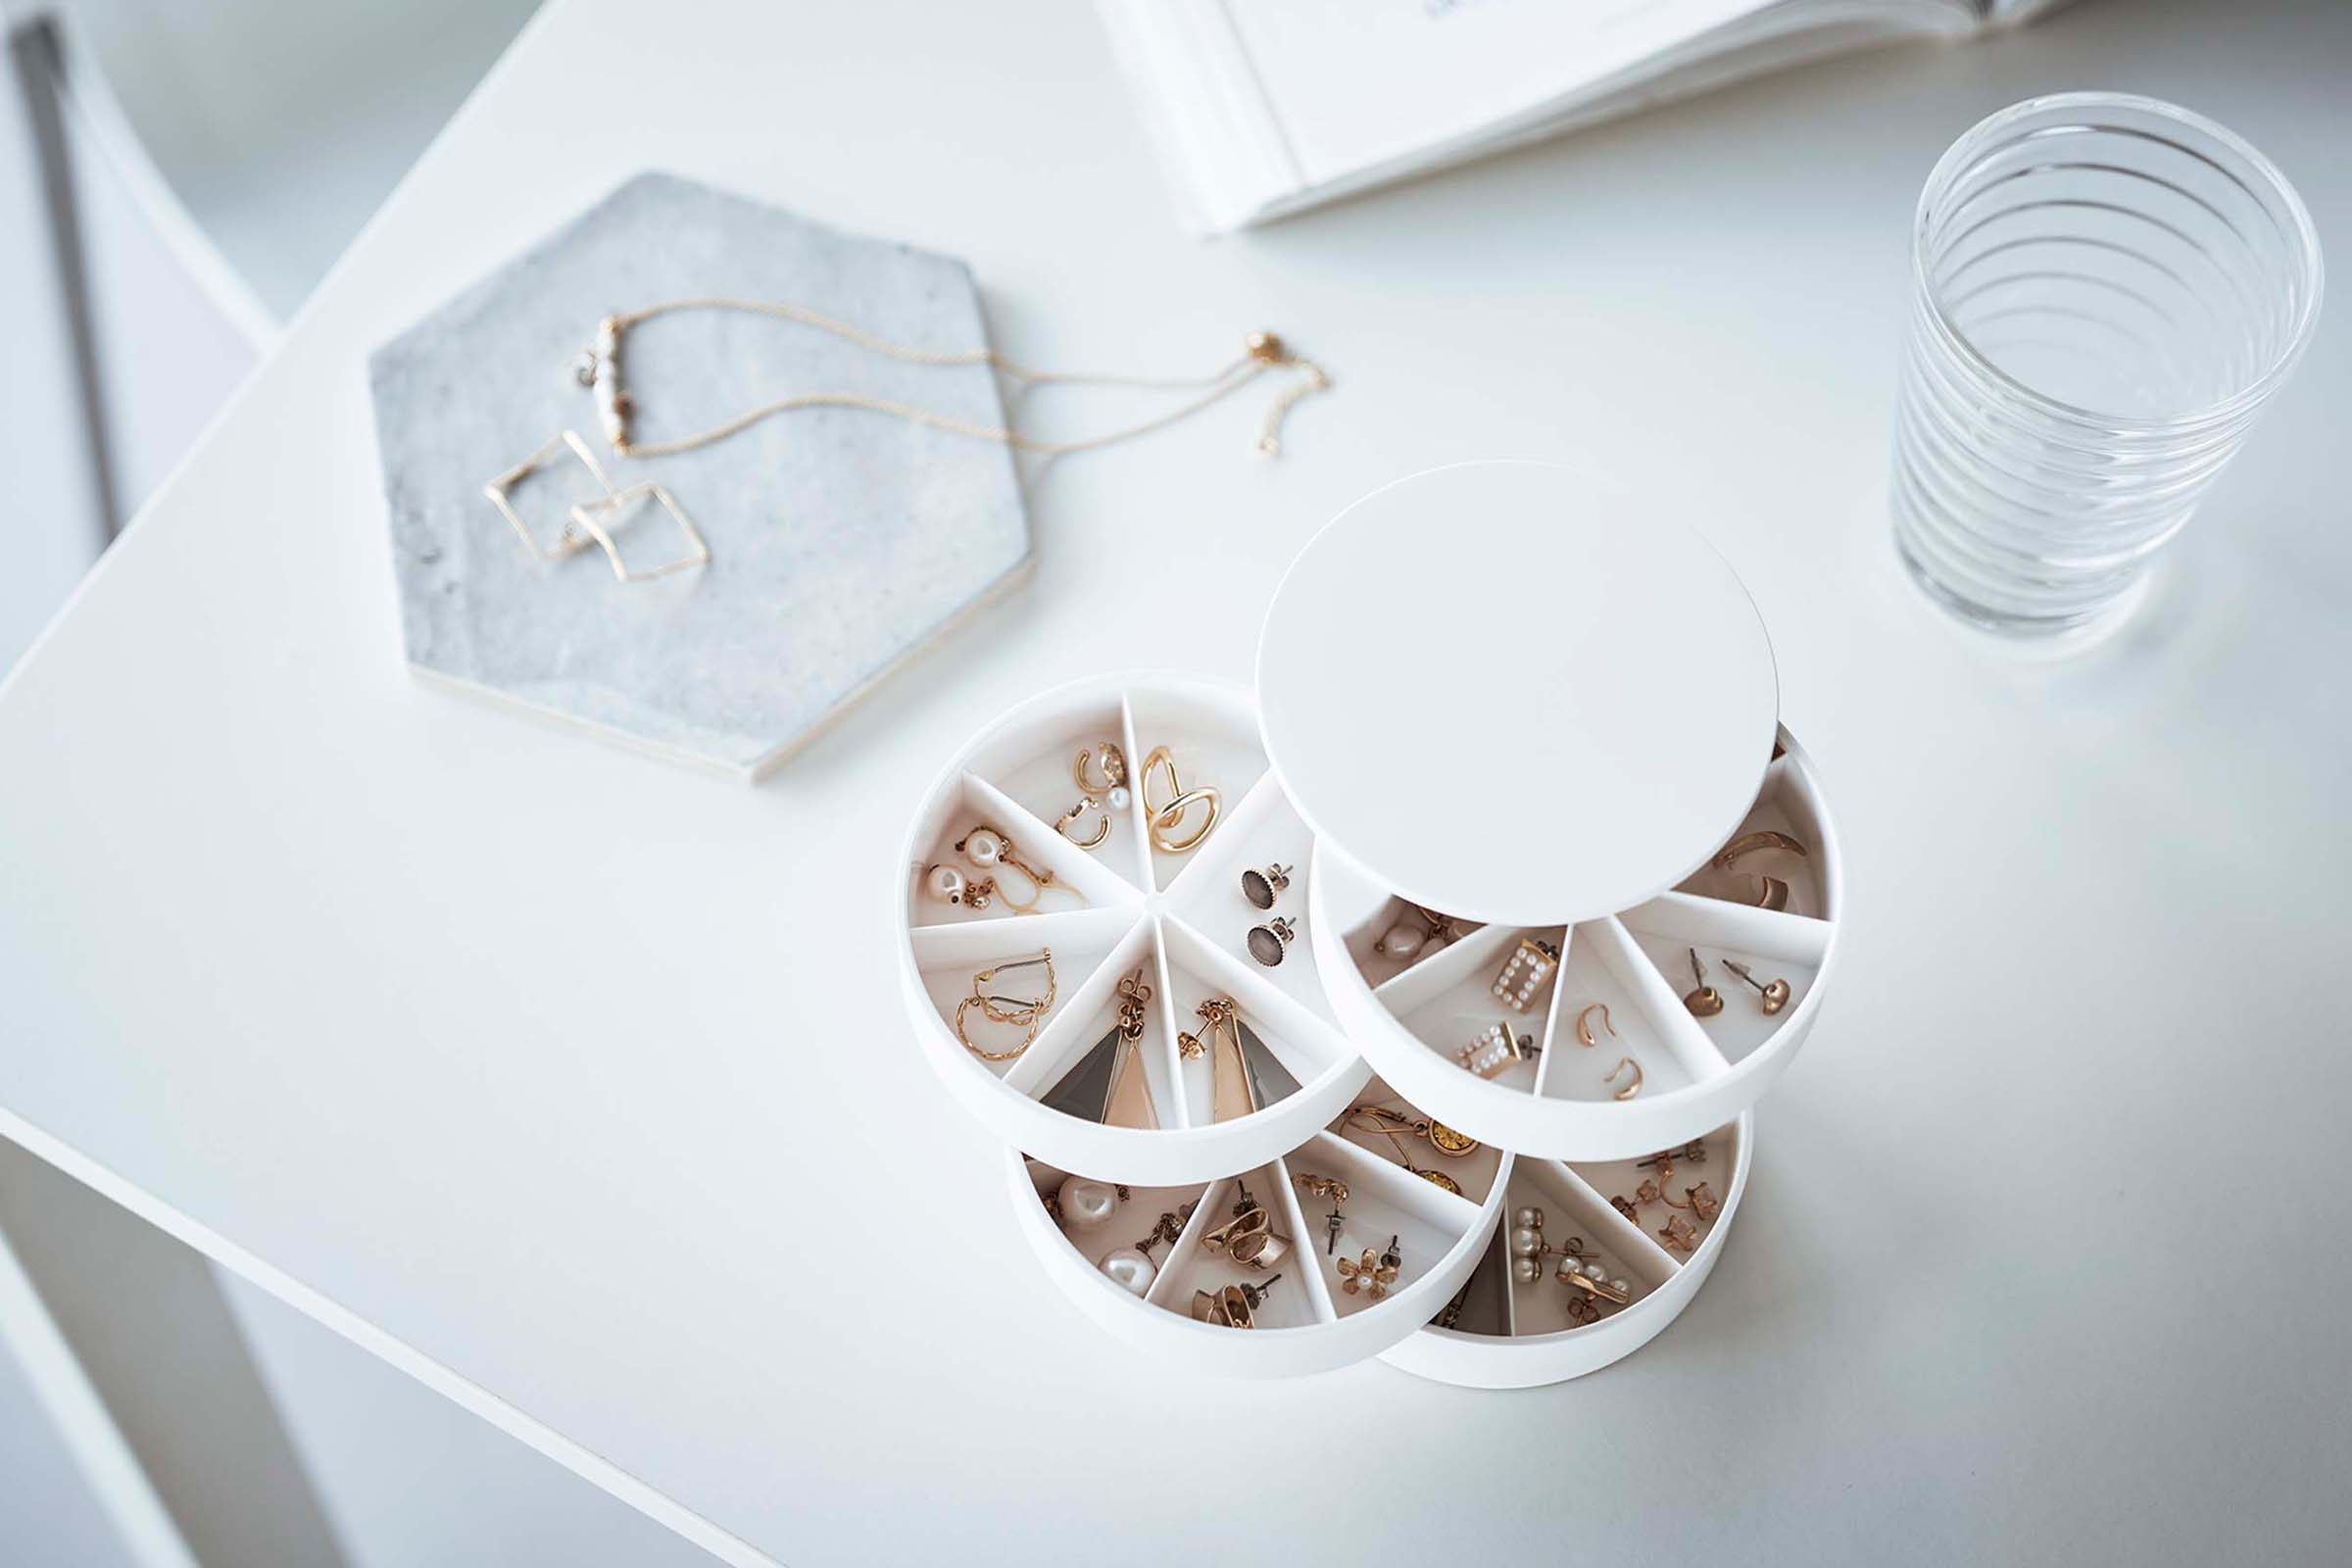 A bird’s-eye view of the corner of a white table. On the table are a cylinder-shaped white four-tier swivel accessory holder, a hexagon shaped catch-all dish and the corner of an opened book.